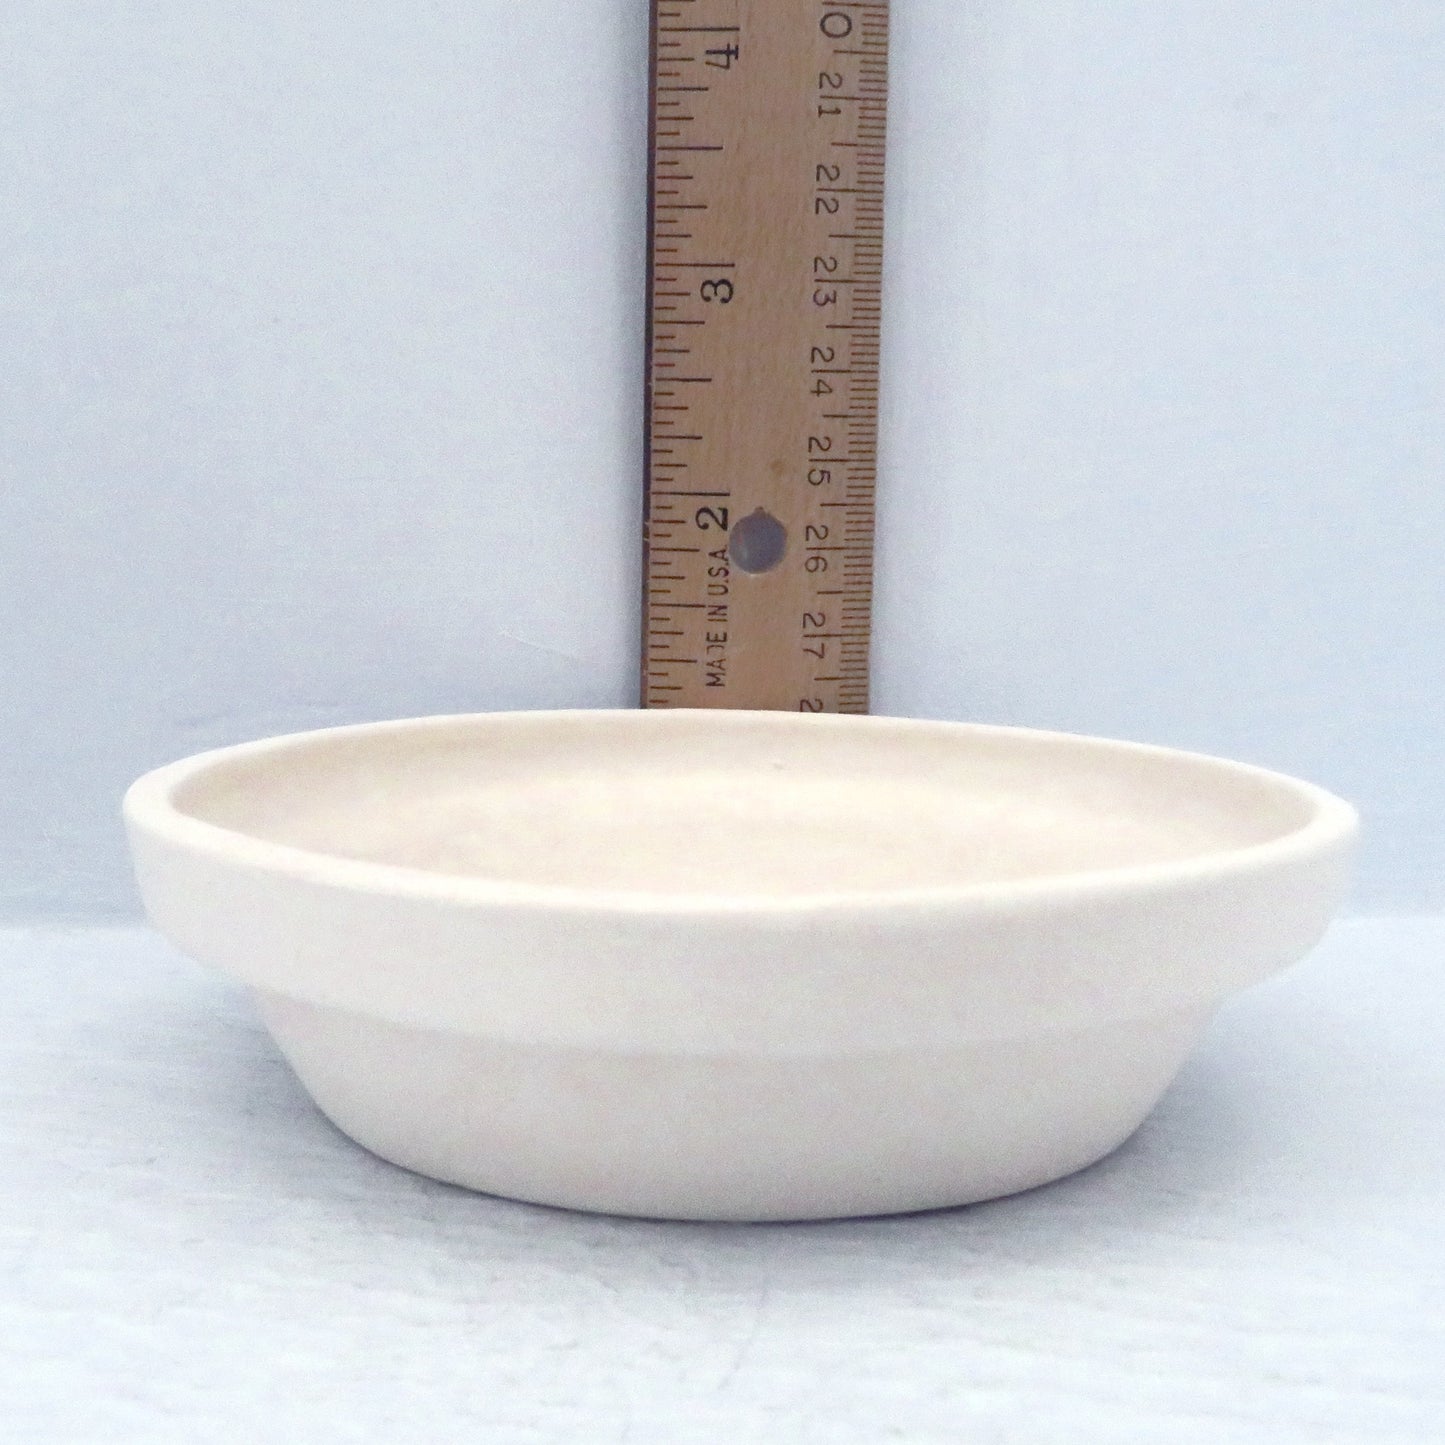 Unpainted Ceramic Pot, Handmade Ready to Paint Ceramic Planter and Saucer, Garden Lover Gift